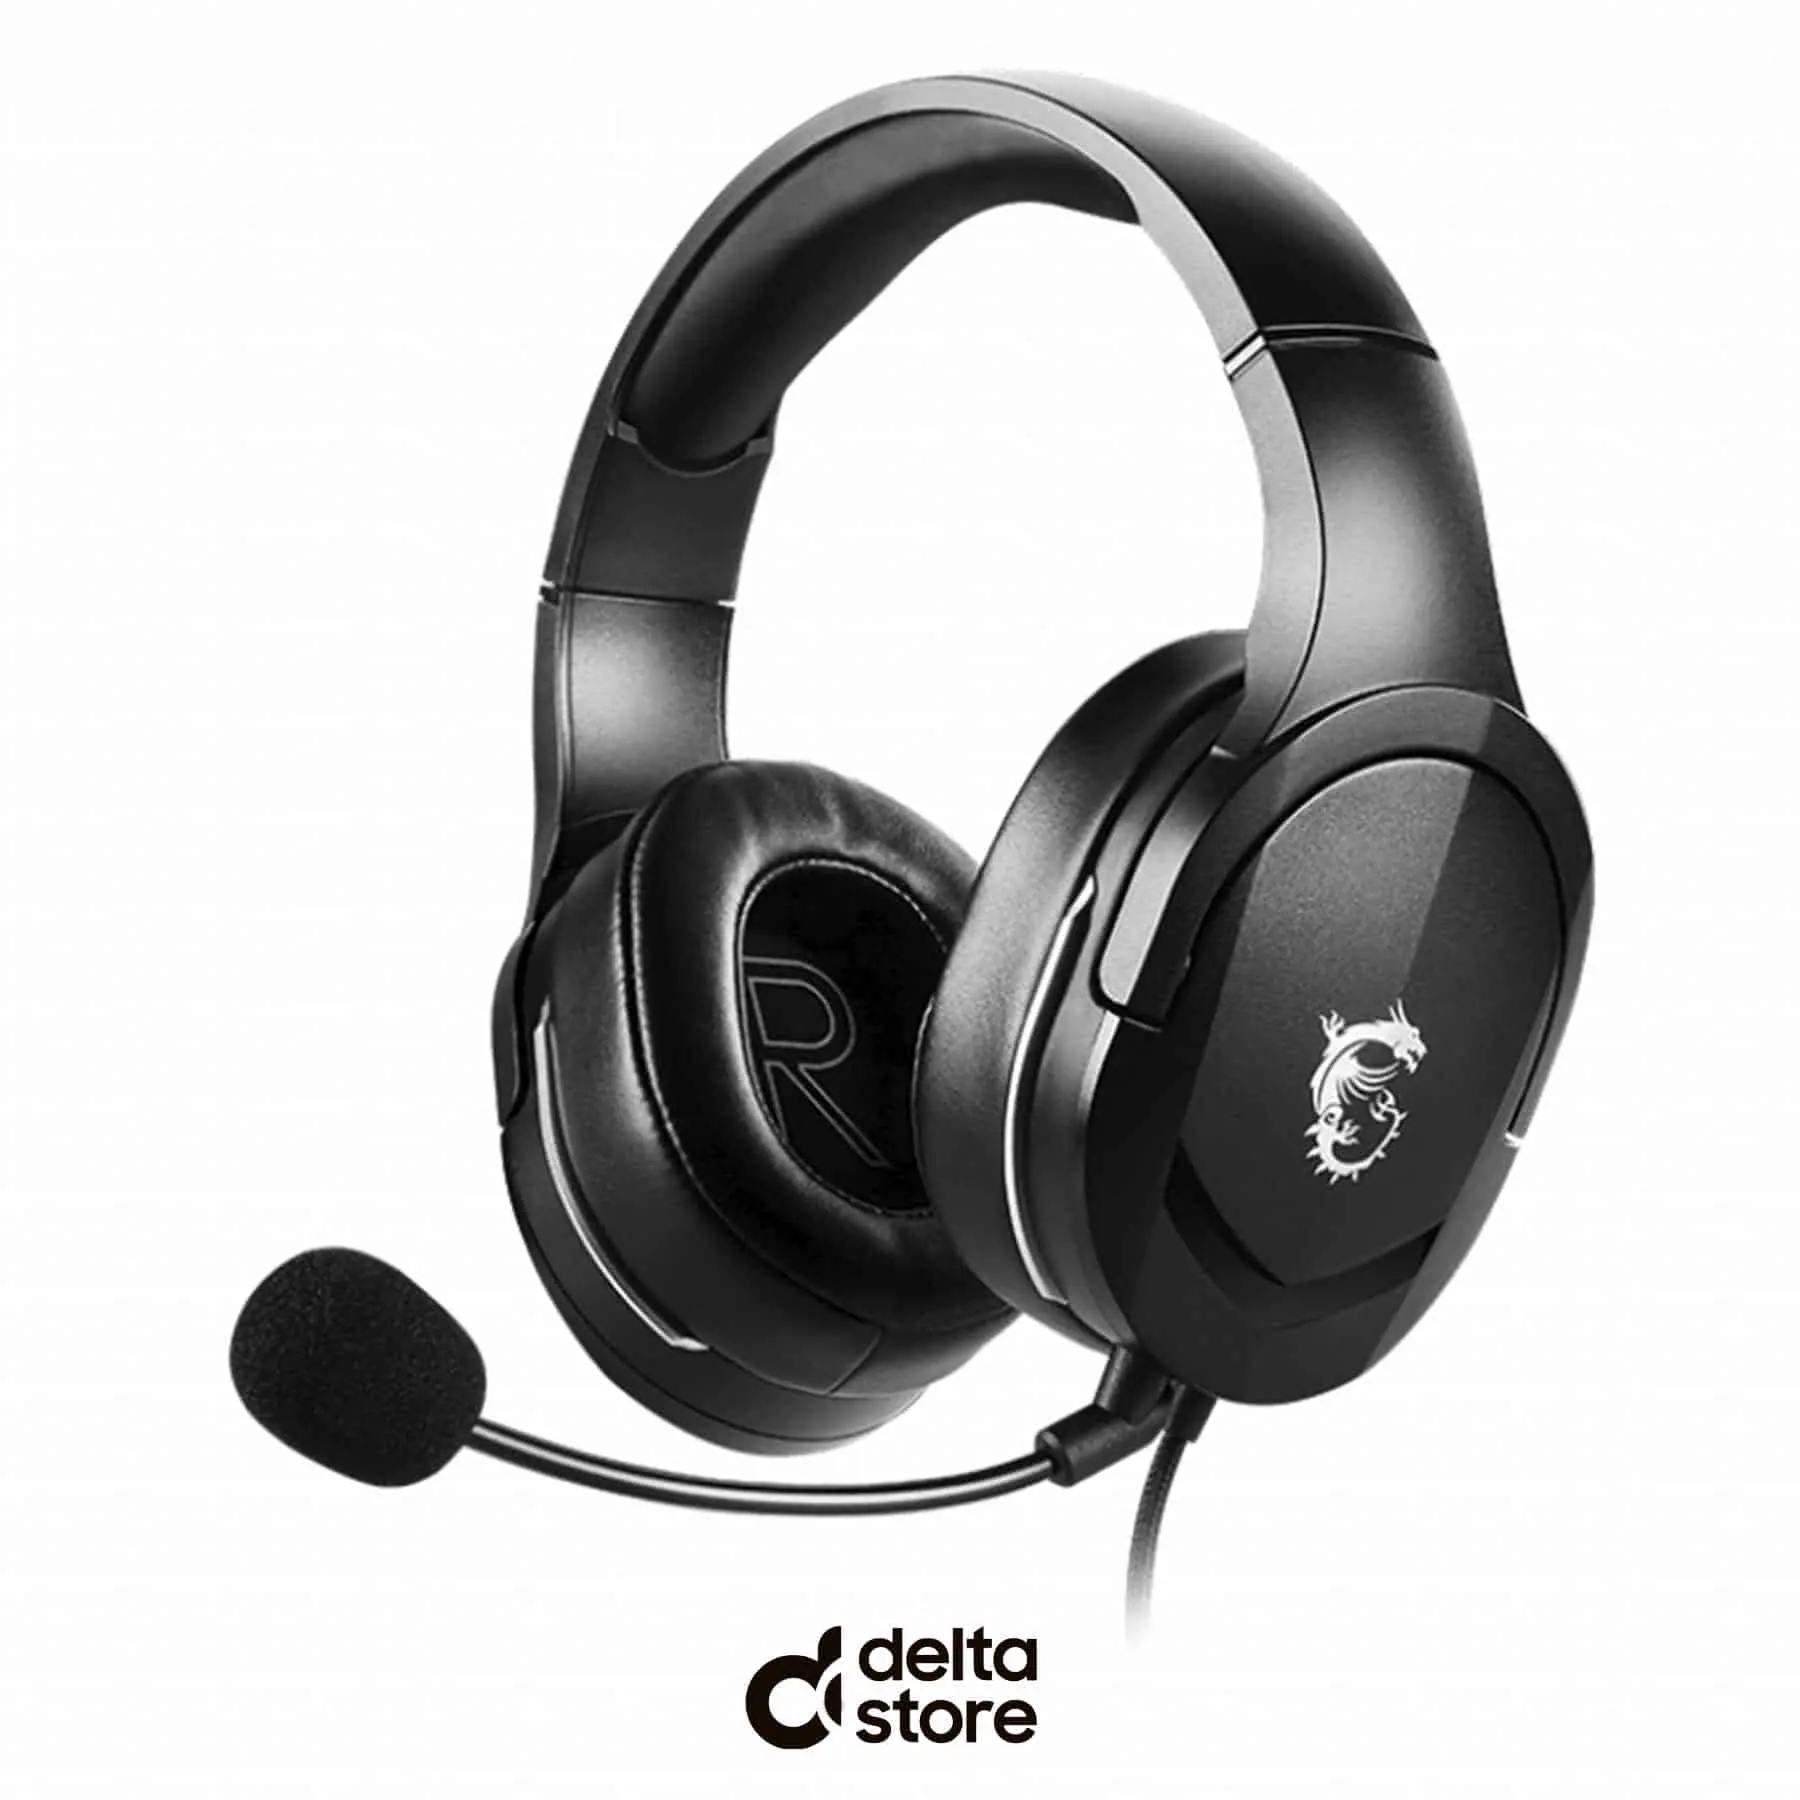 MSI immerse GH20 Gamig Headset